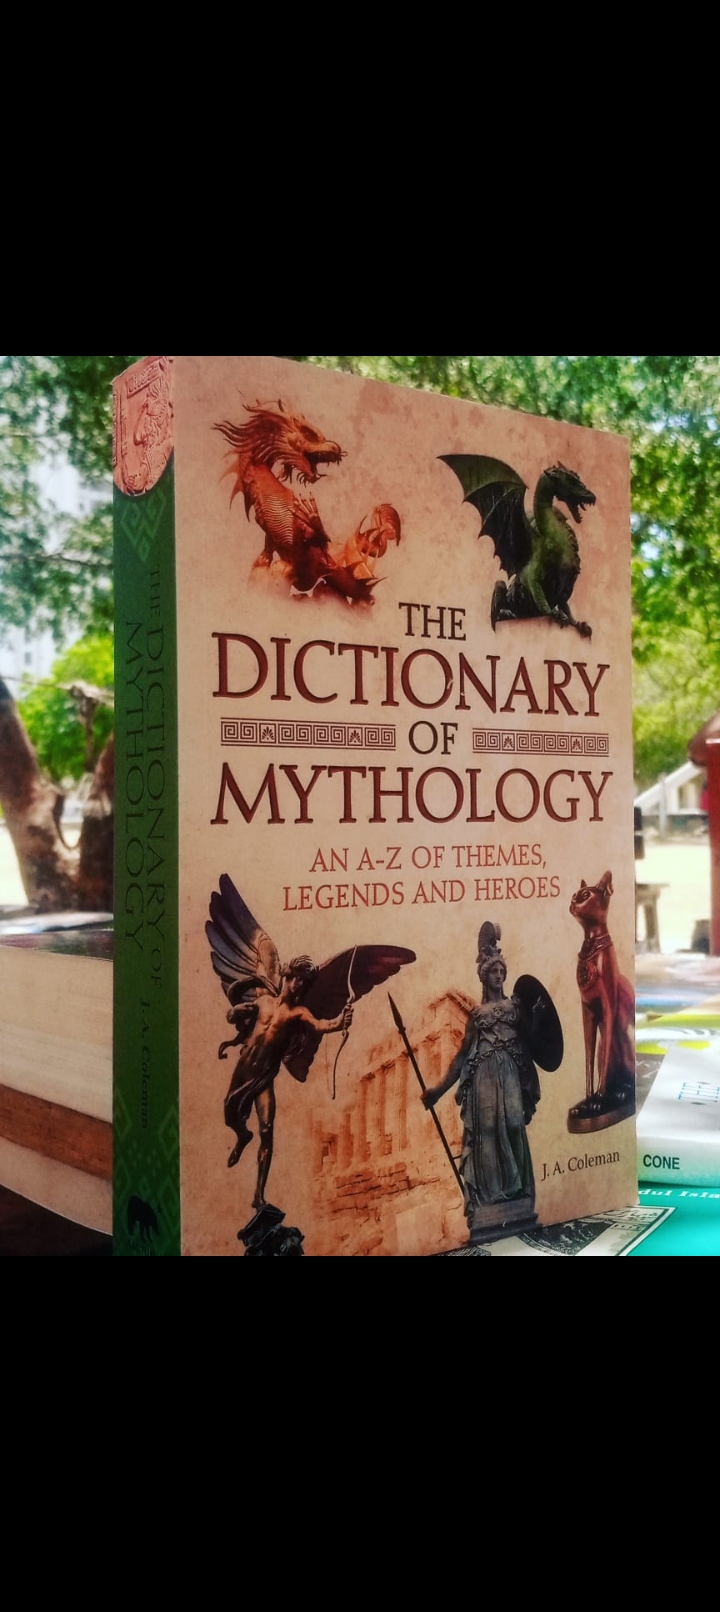 the dictionary of mythology an a-z of themes, legends and heroes by j.a. coleman. new original paper